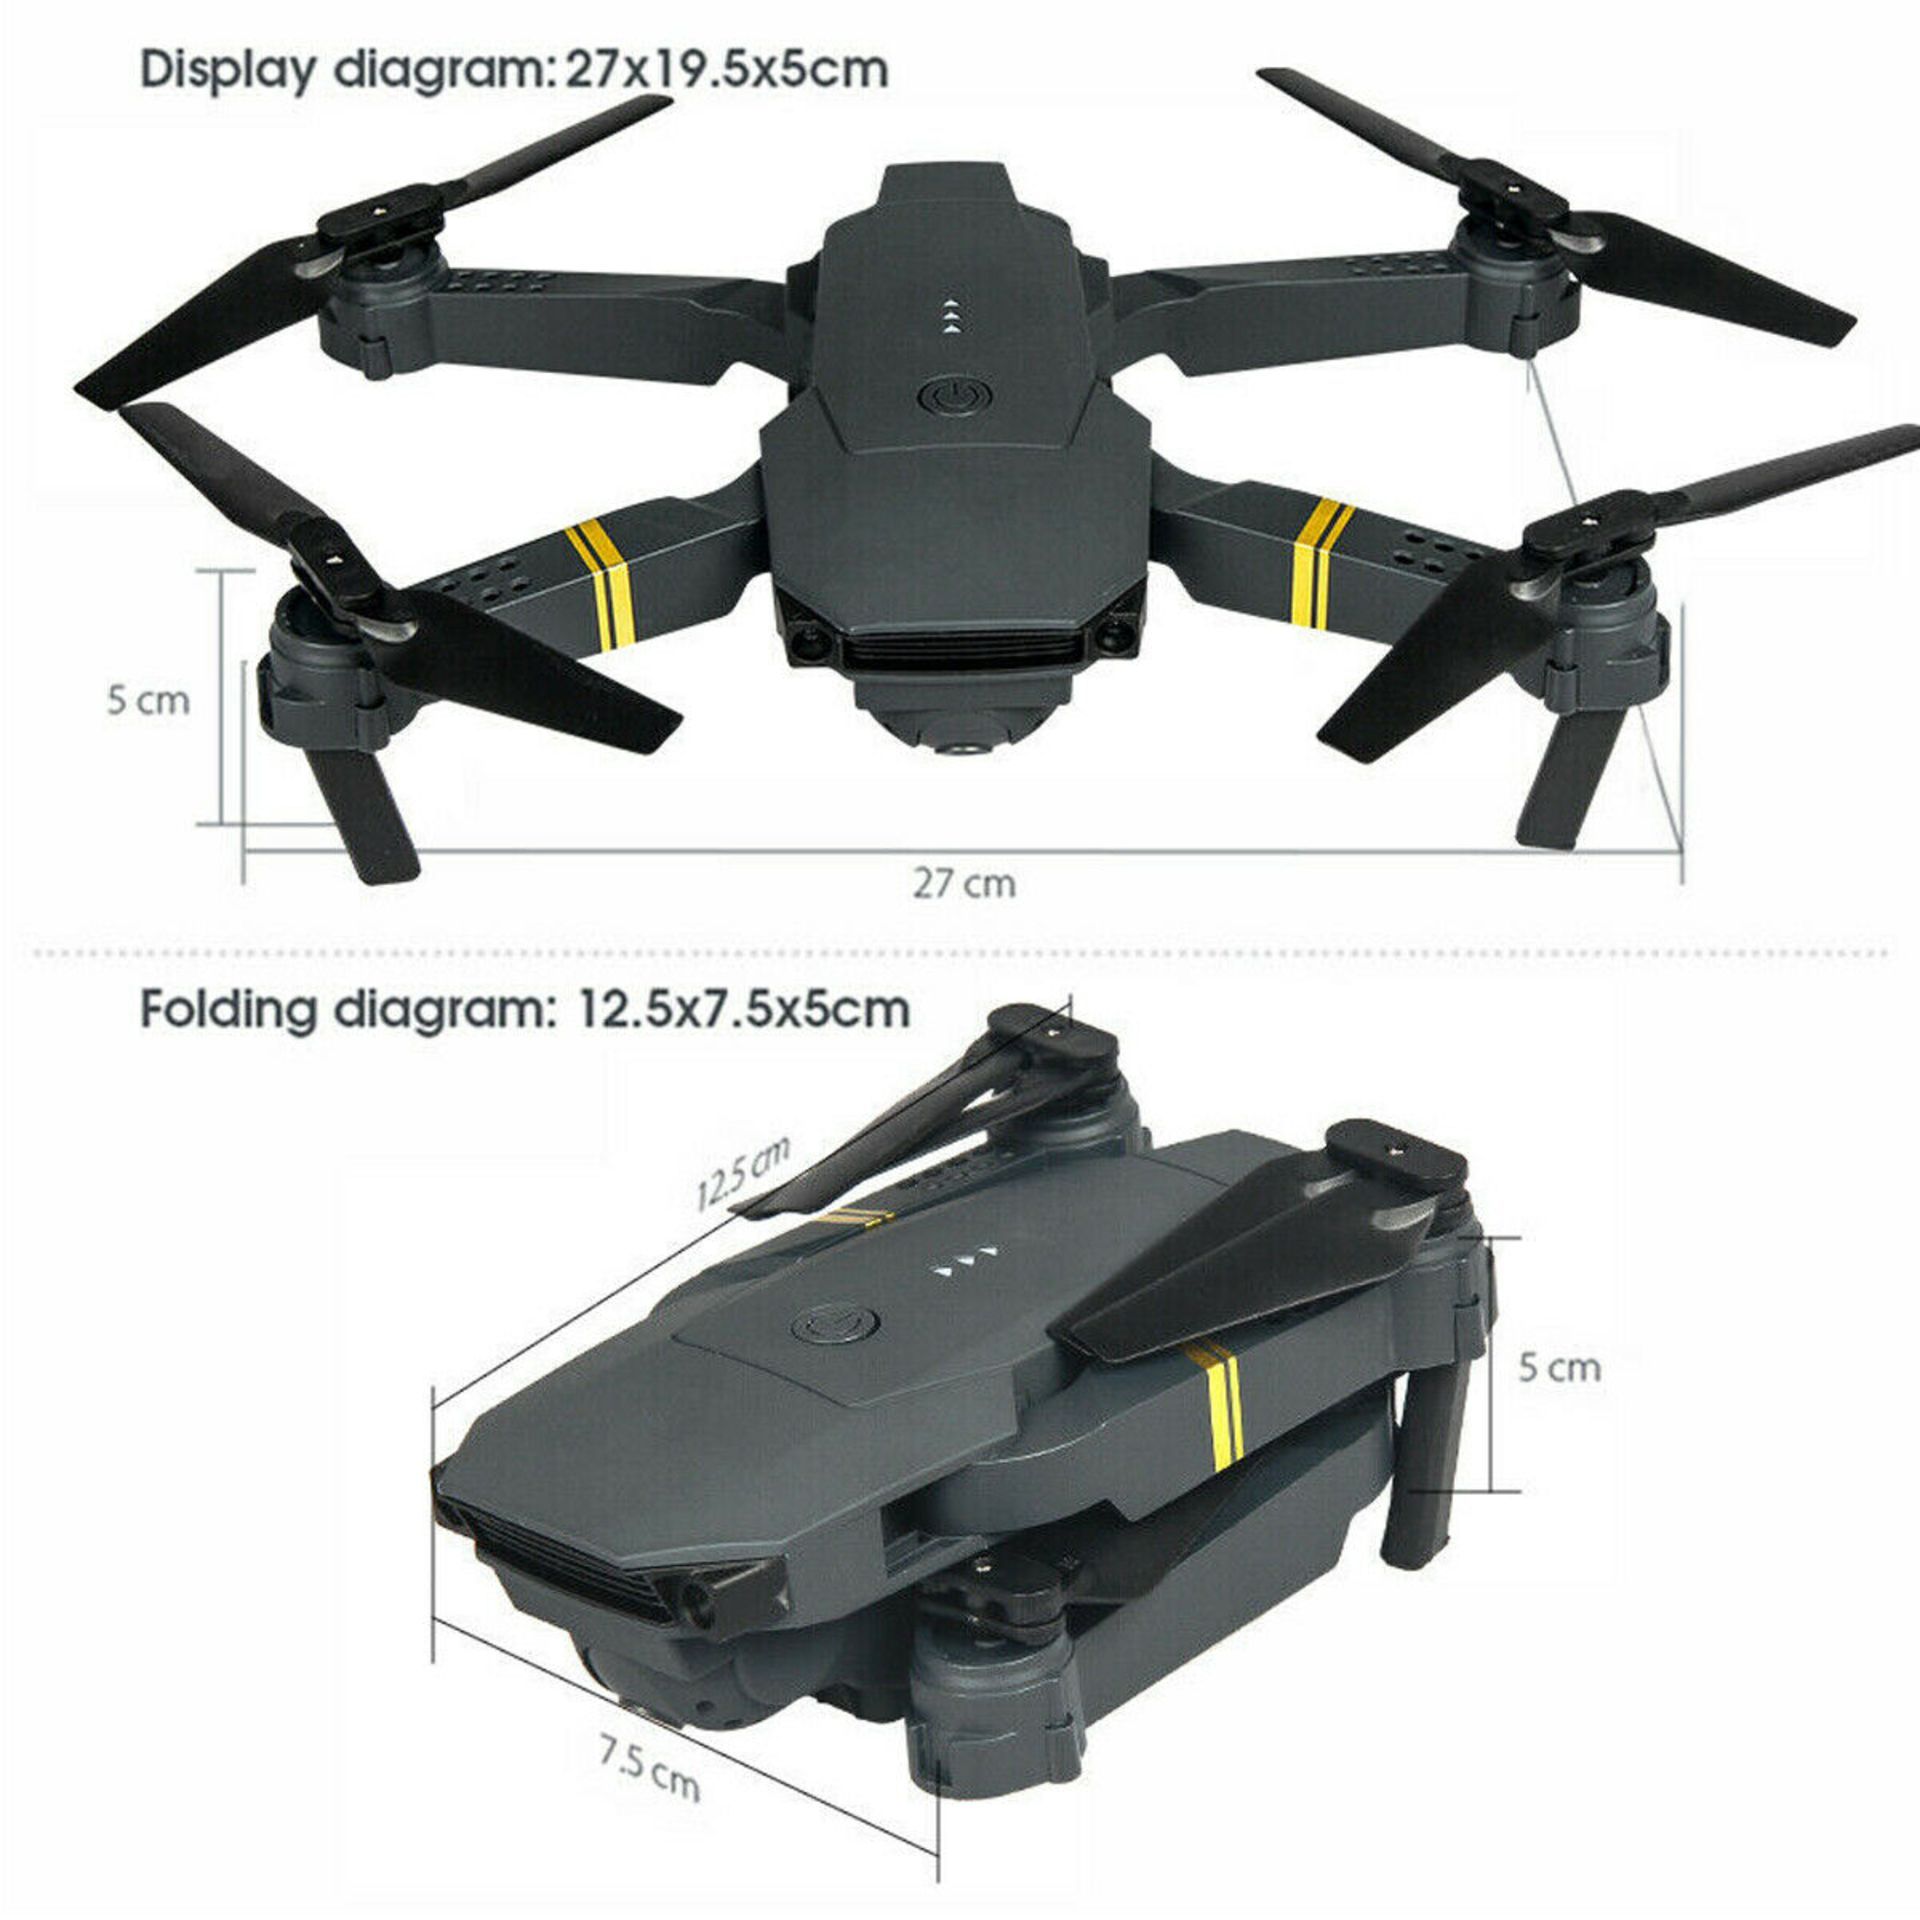 NEW & UNUSED DRONE X PRO WIFI FPV 1080p HD CAMERA FOLDABLE RC QUADCOPTER + CASE/ BAG *NO VAT* - Image 5 of 11